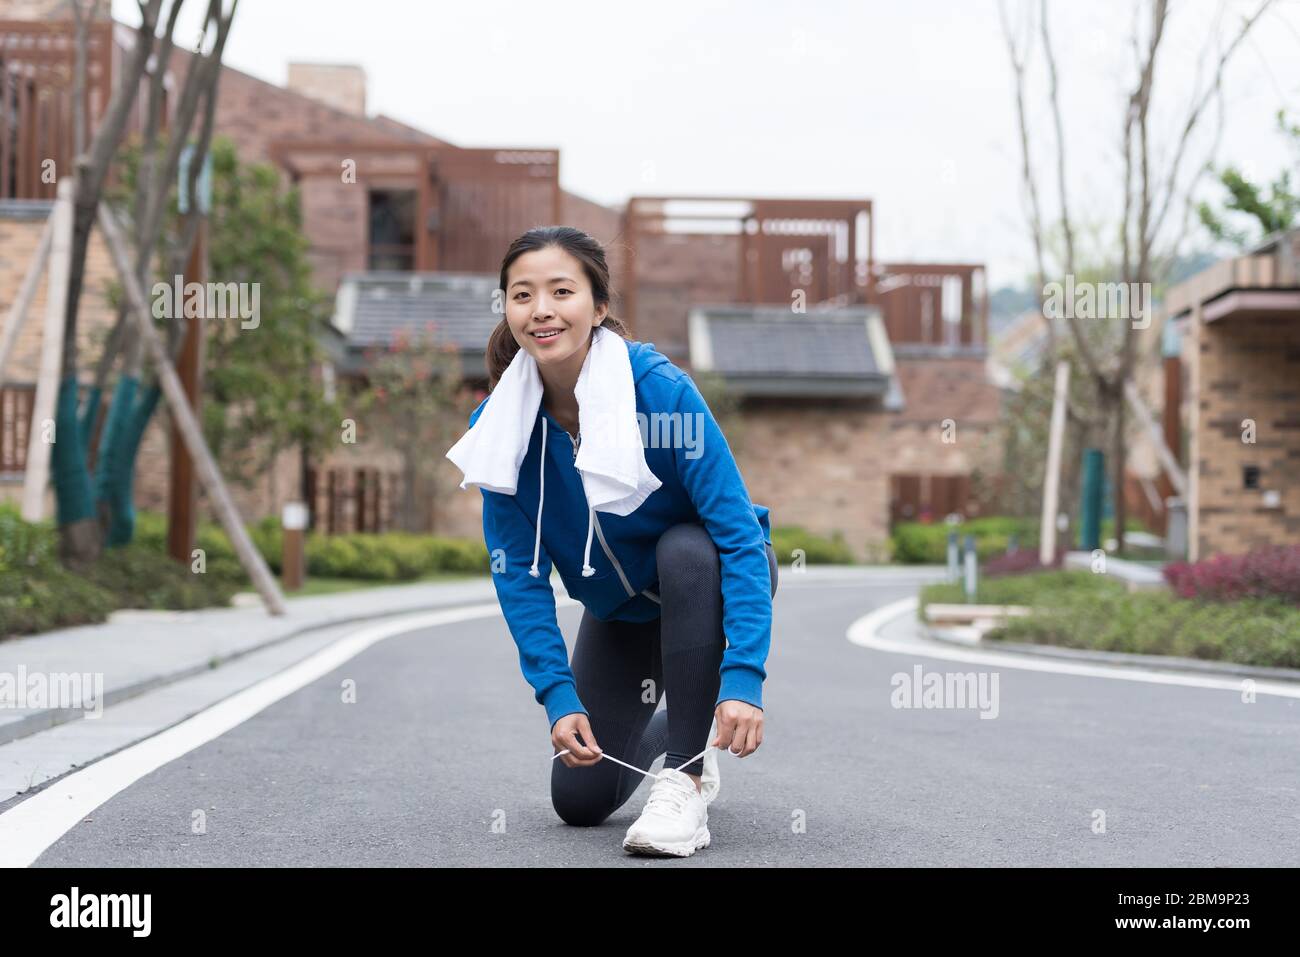 A young Asian woman squatting to tie shoelaces Stock Photo